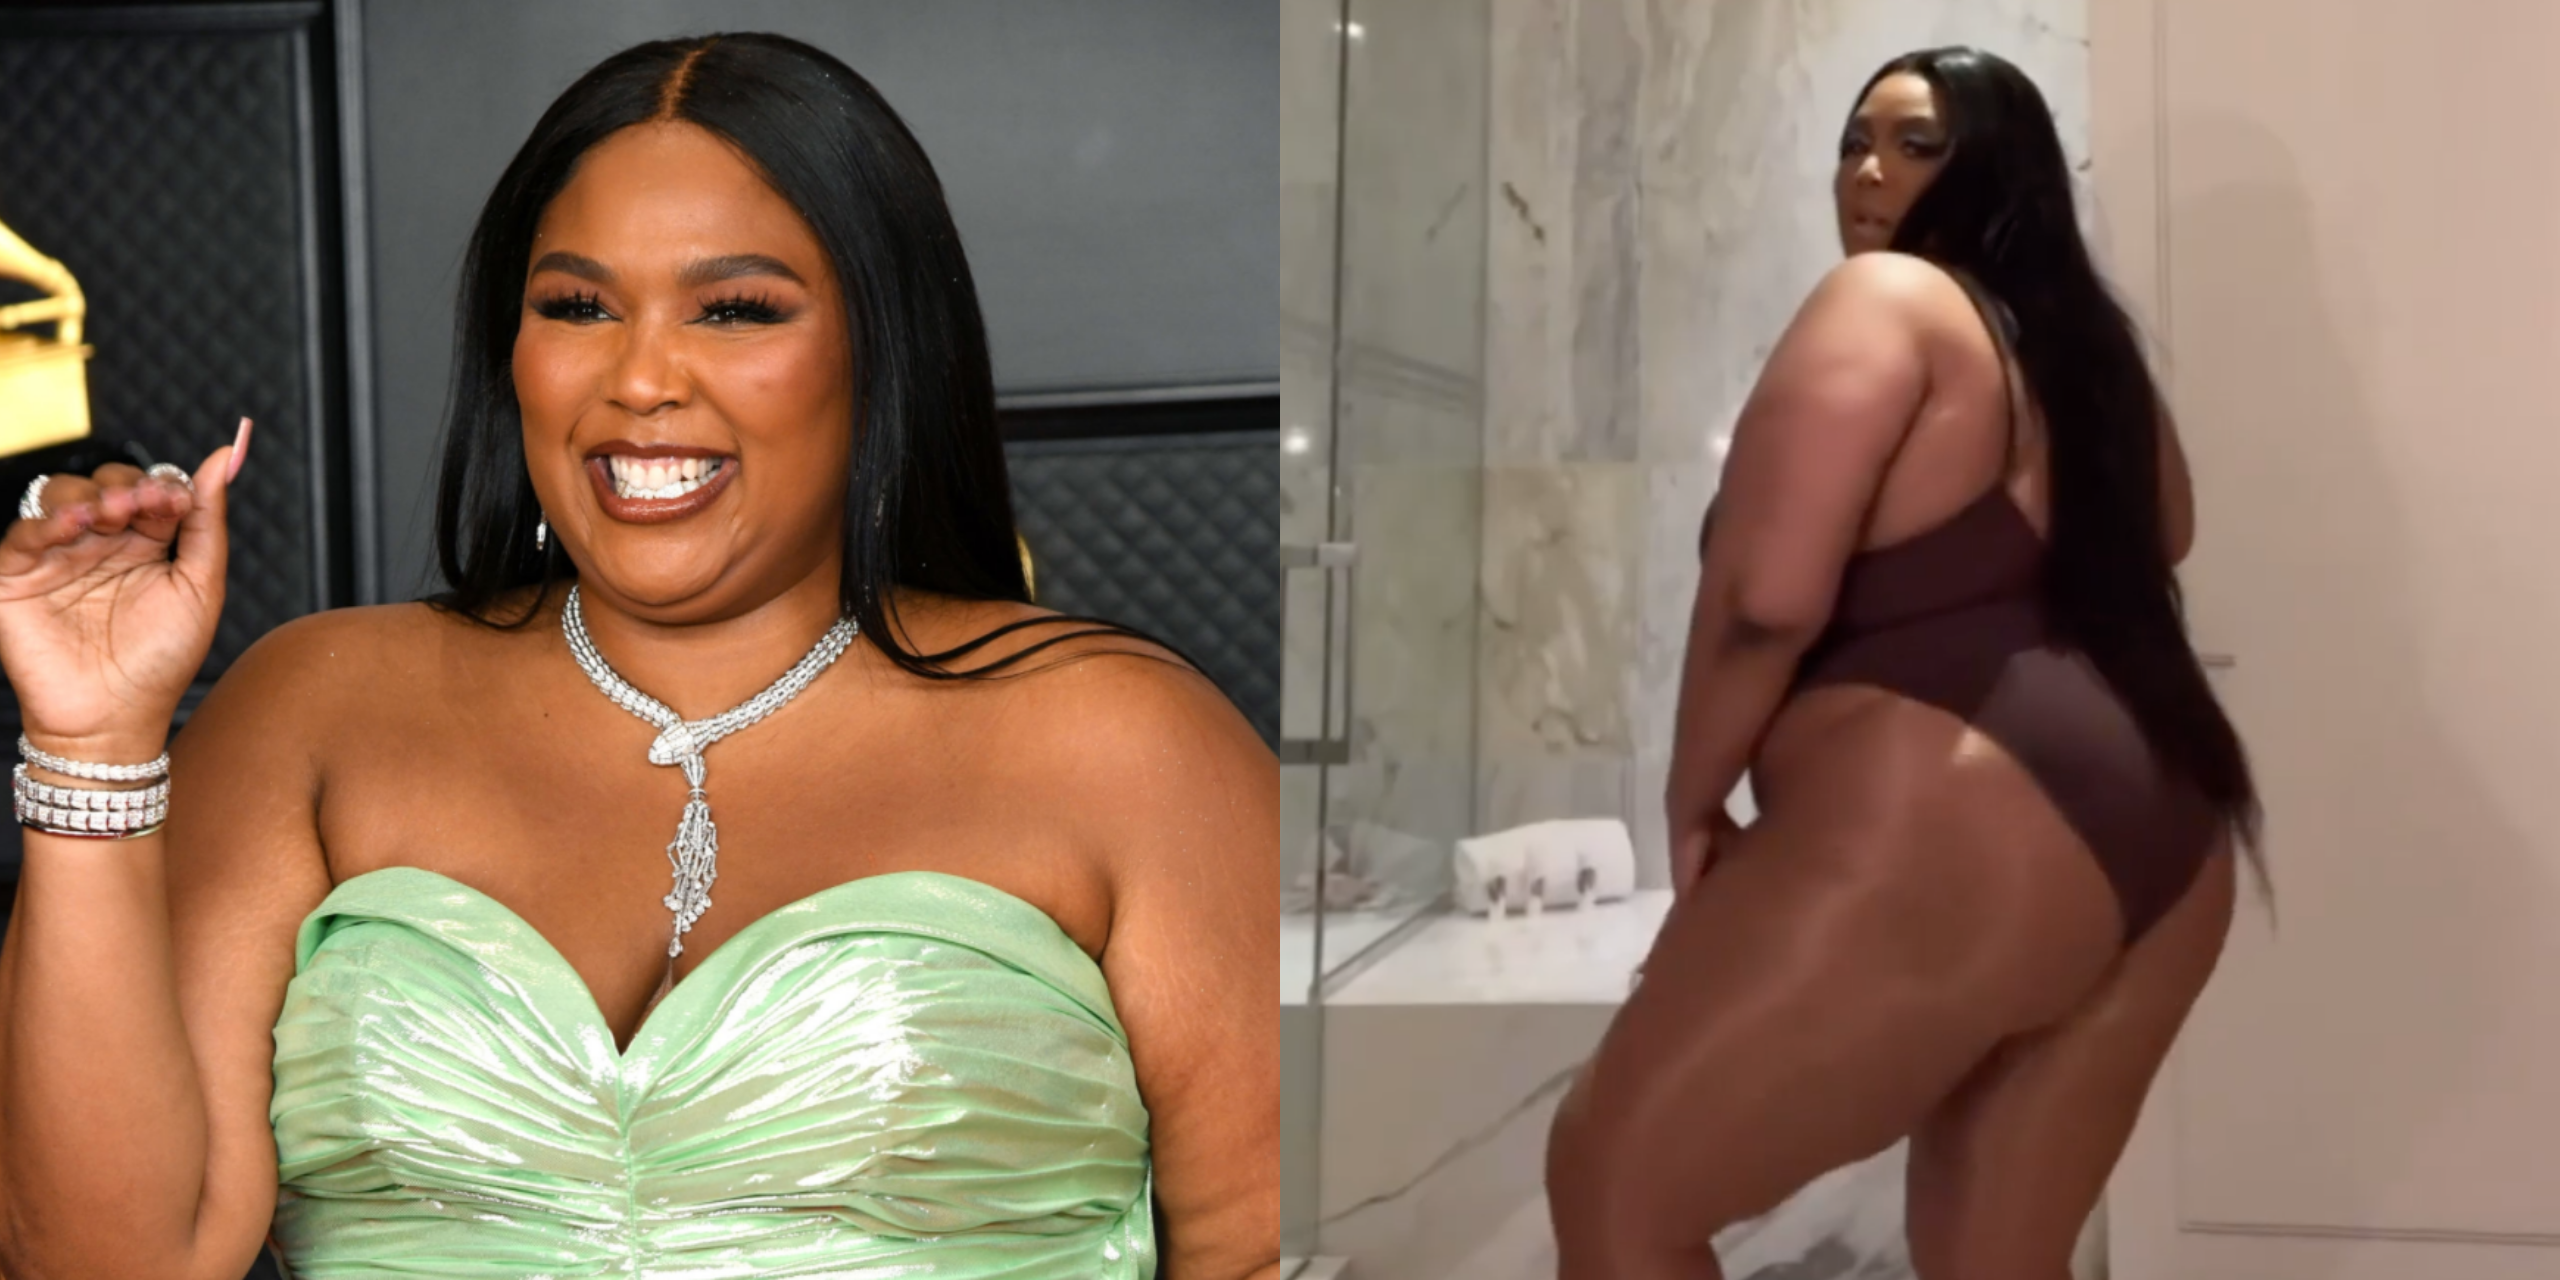 Lizzo Shares Body Positive Instagram Normalizing Weight Gain